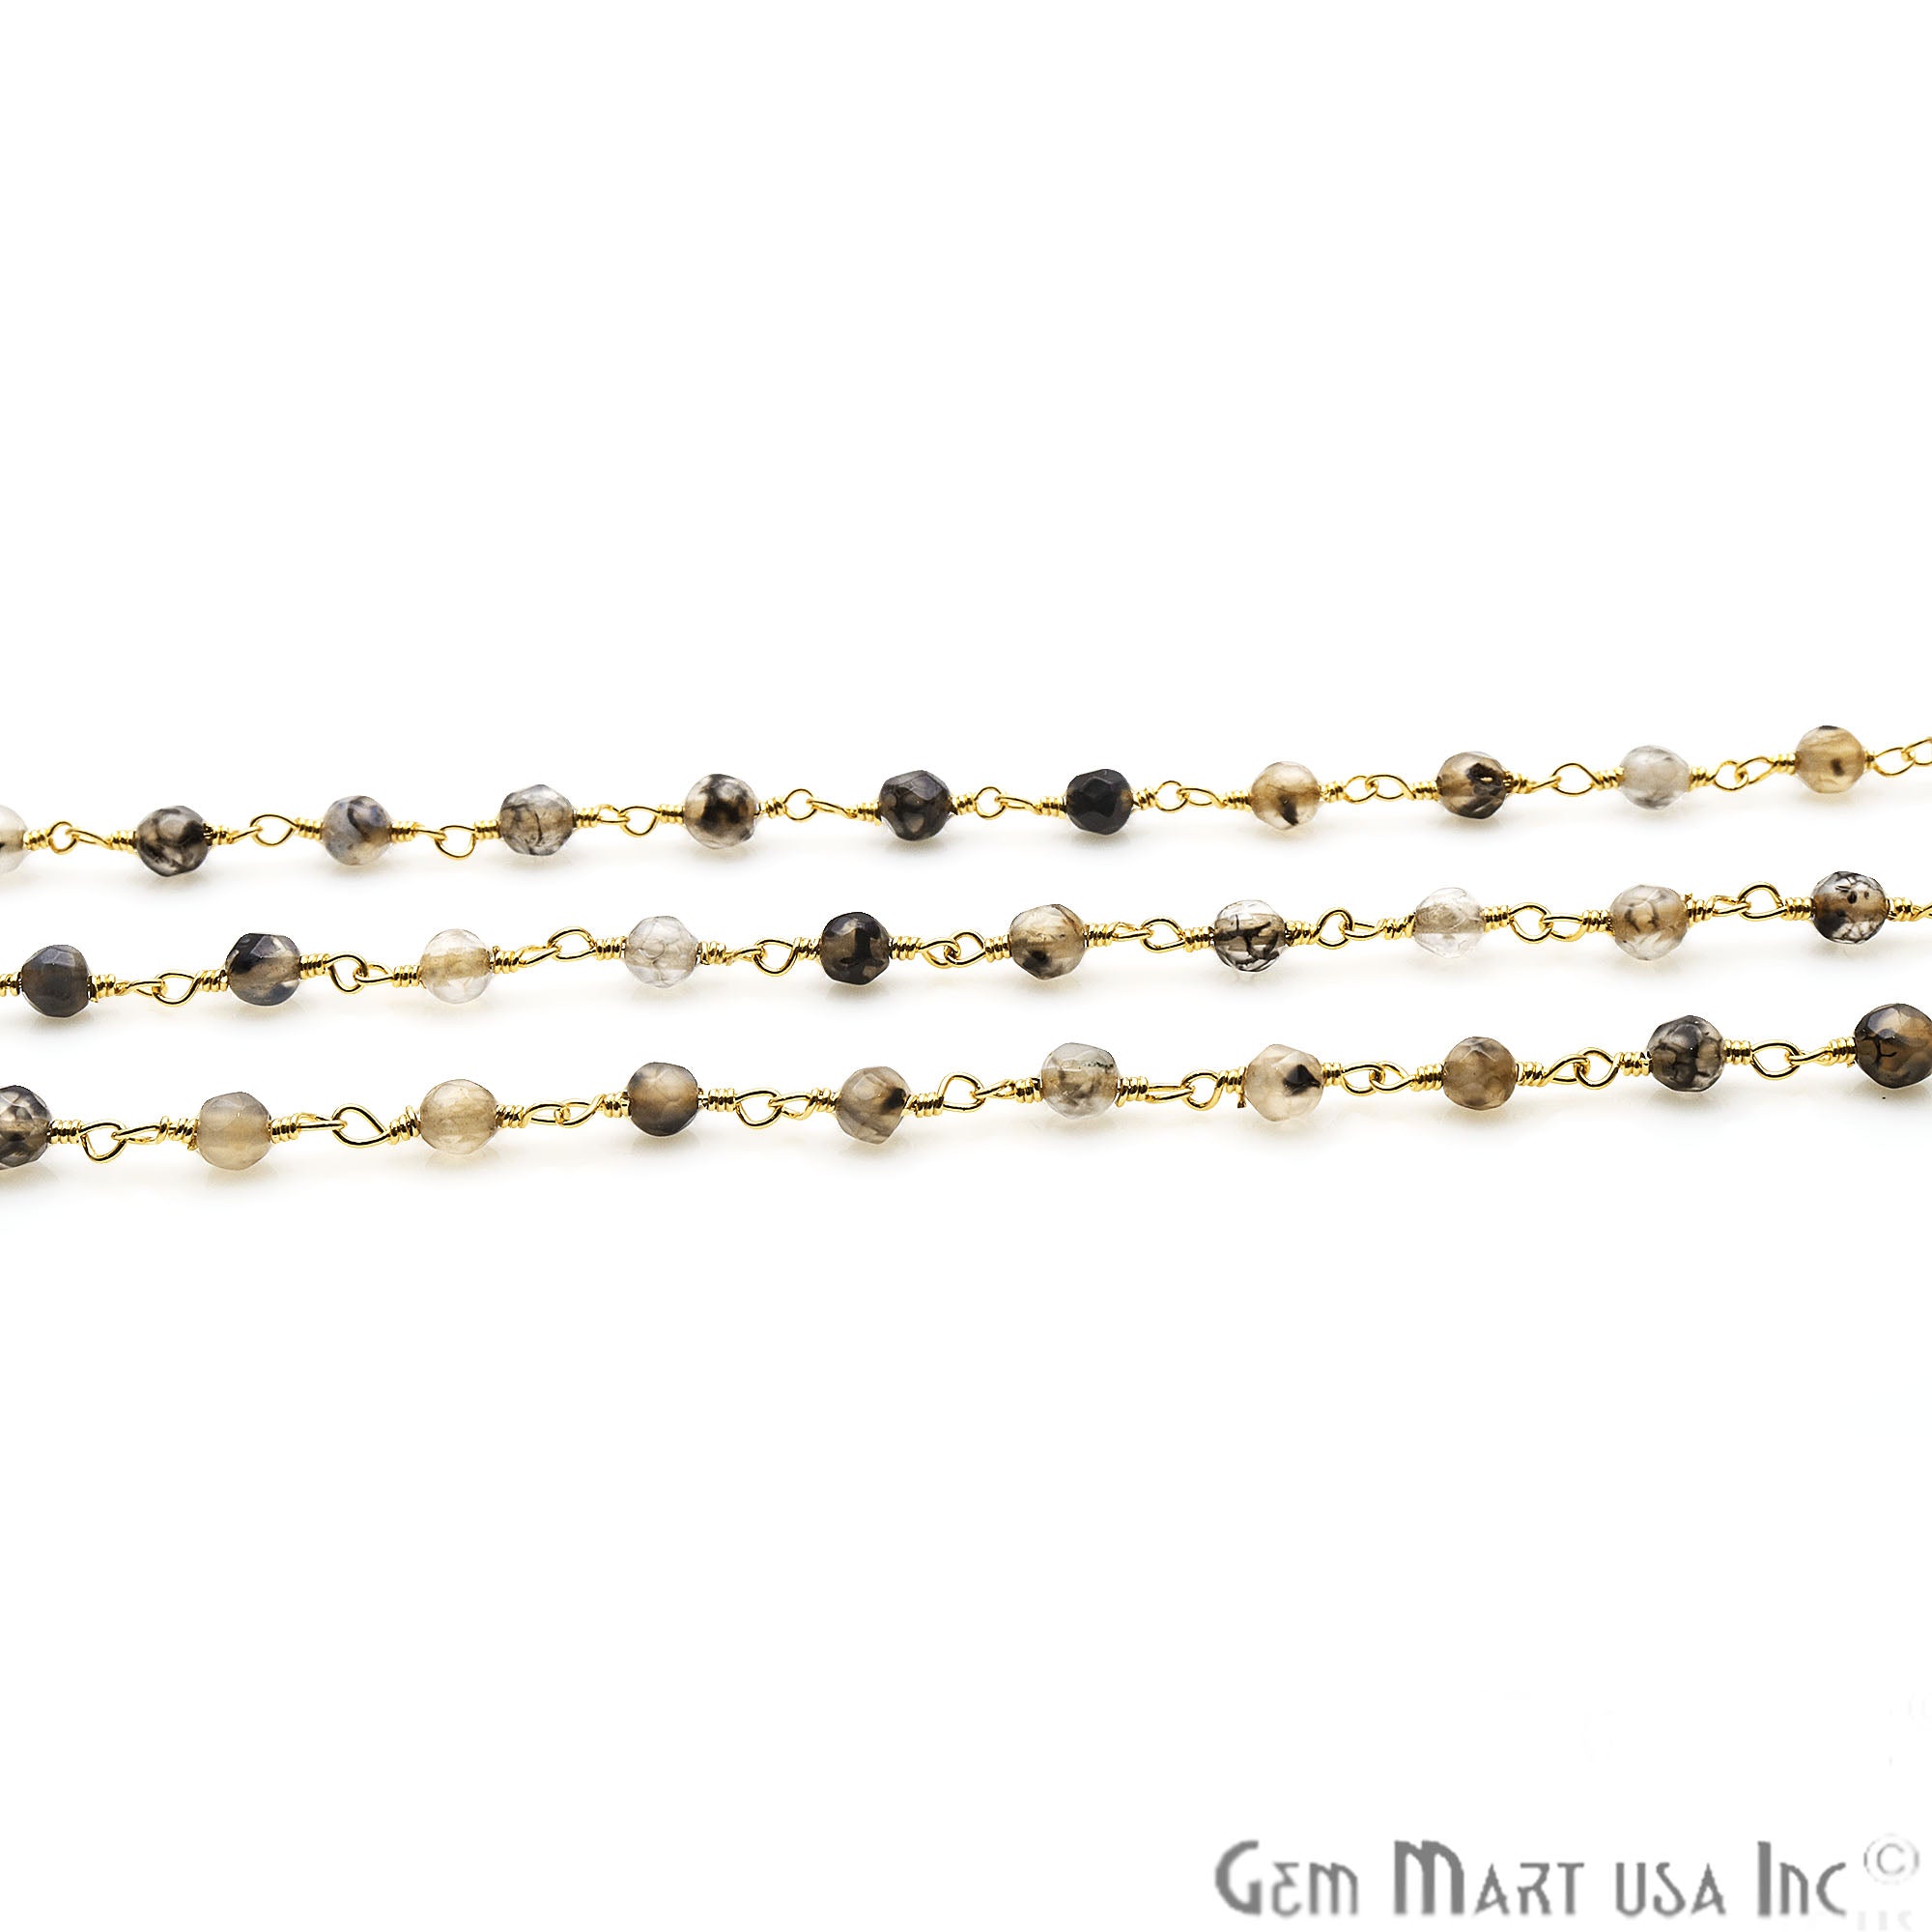 Brown Rutile Jade Faceted Beads 4mm Gold Plated Wire Wrapped Rosary Chain - GemMartUSA